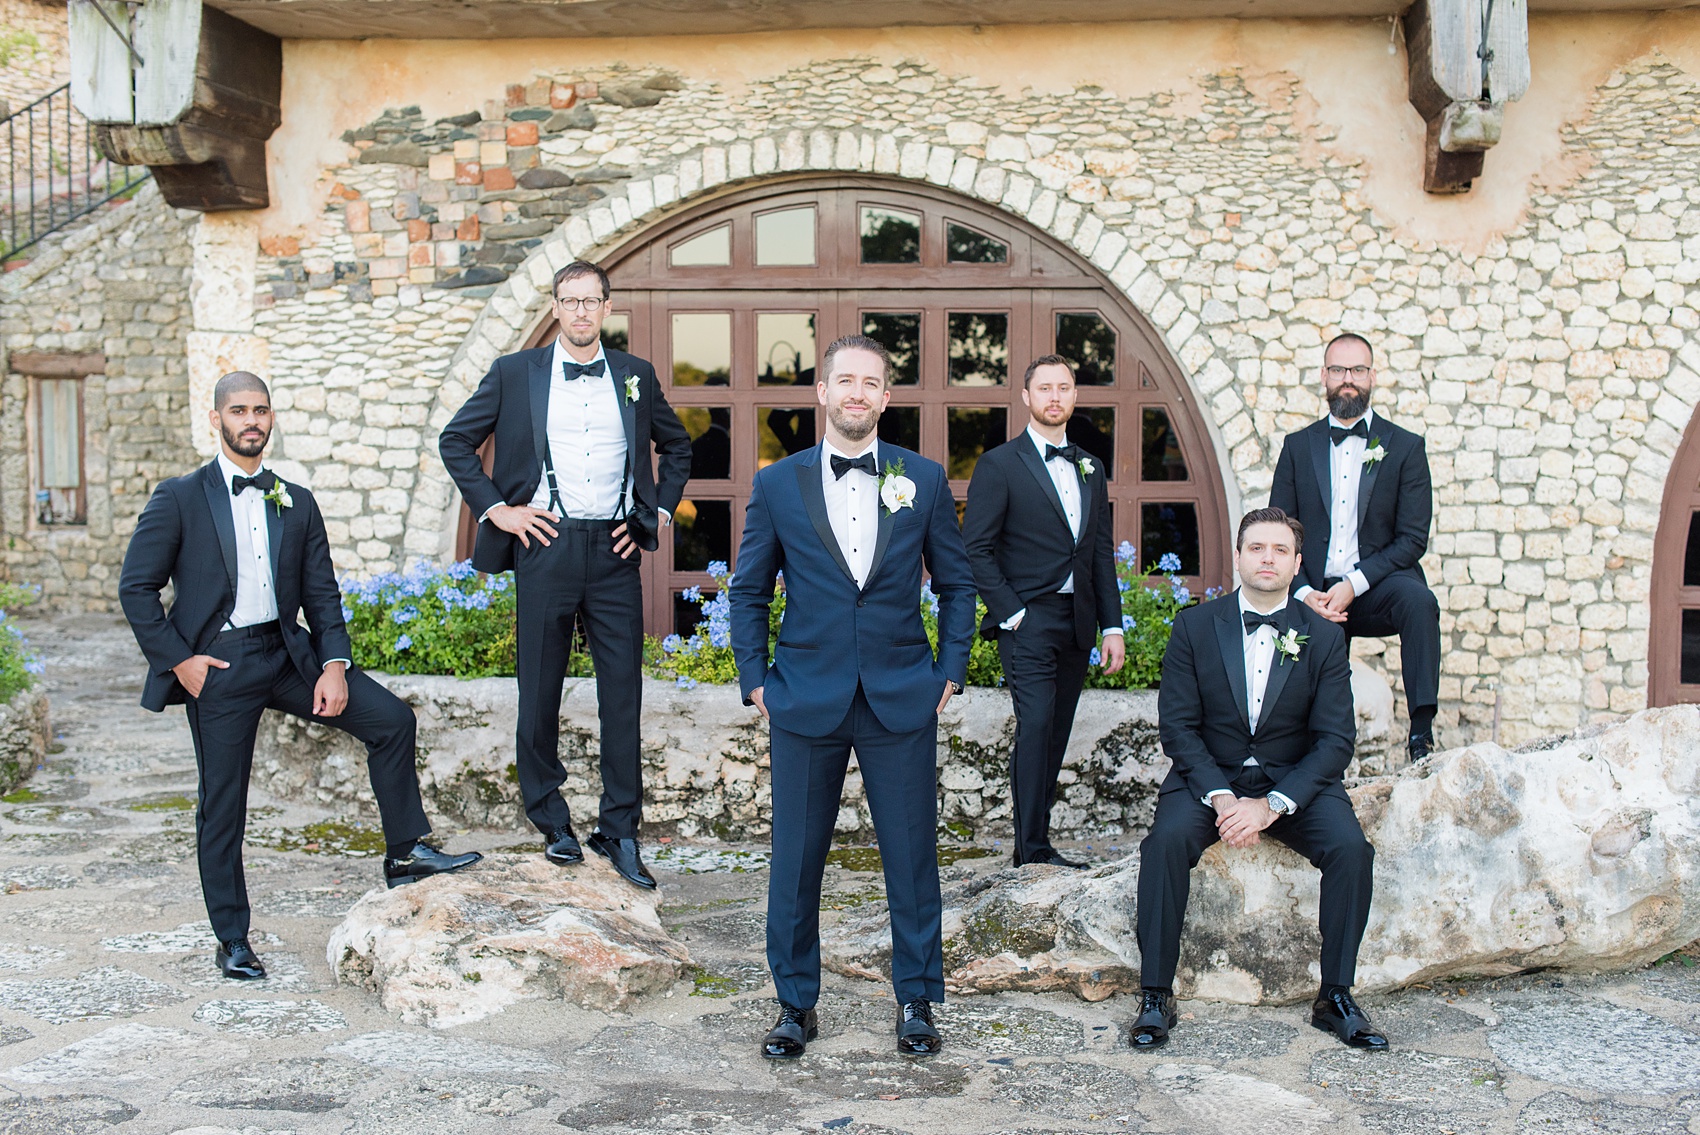 Mikkel Paige Photography, destination wedding photographer, pictures from Casa de Campo. This incredible venue in the Caribbean is in La Romana, Dominican Republic. It has such character and awesome, beautiful locations for photography at every turn. This photo of the groomsmen in black and navy suits was very Vogue-like and its creativity will give you great ideas for your day. Click through for more! #DestinationWedding #DestinationWeddingPhotographer #MikkelPaige #DominicanRepublicWedding 